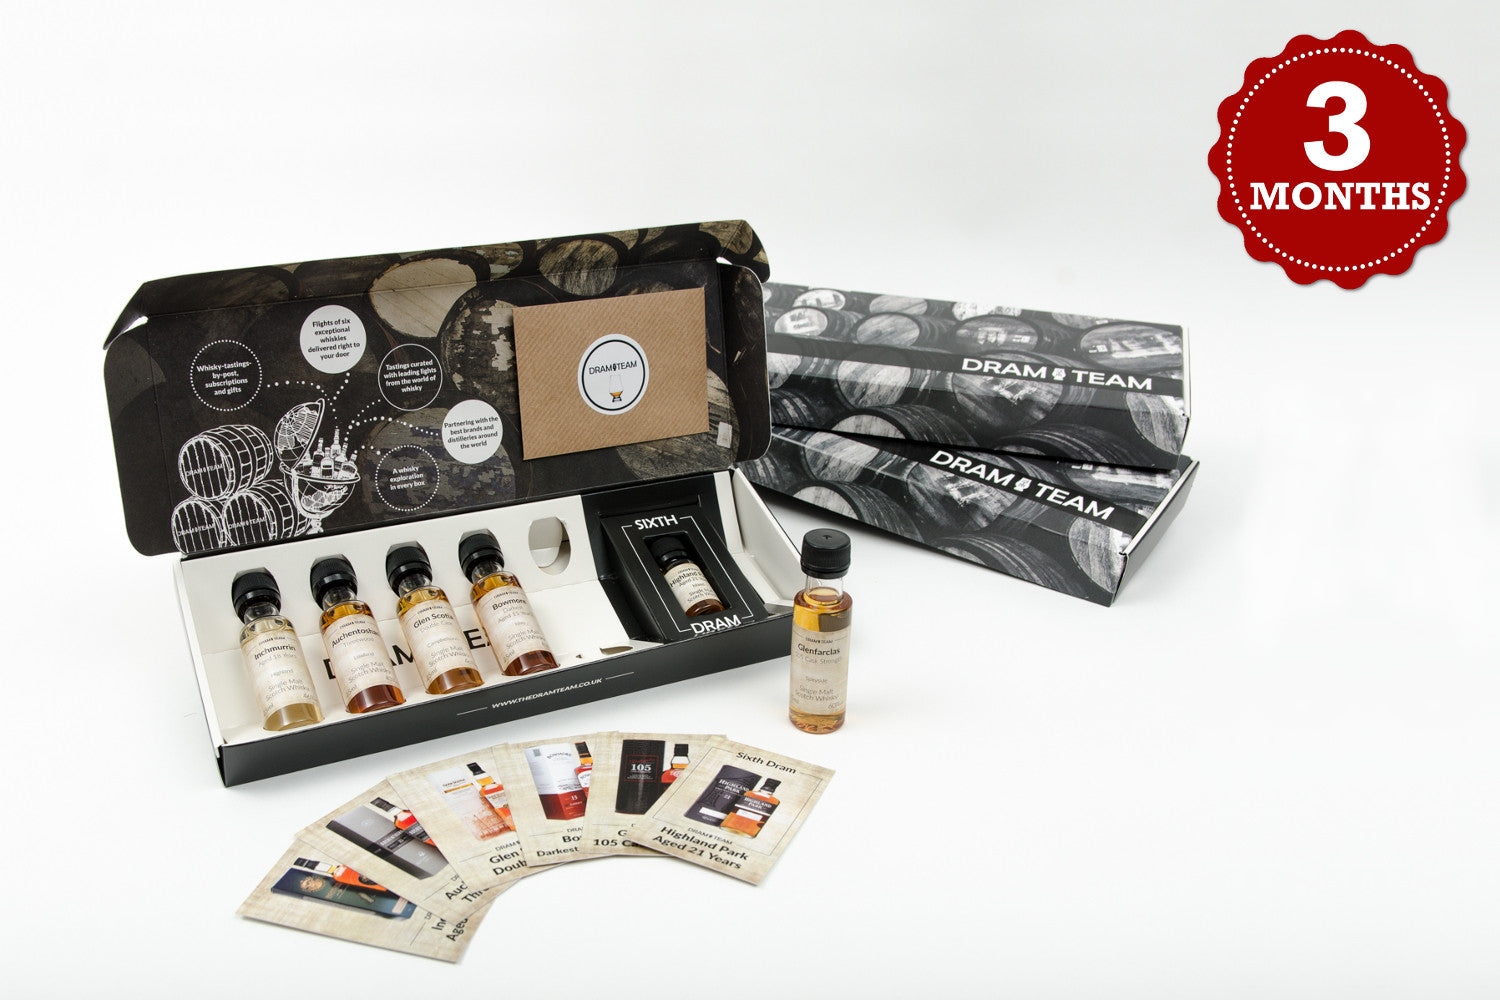 Three Month Whisky Tasting Box Gift Subscription - The Dram Team